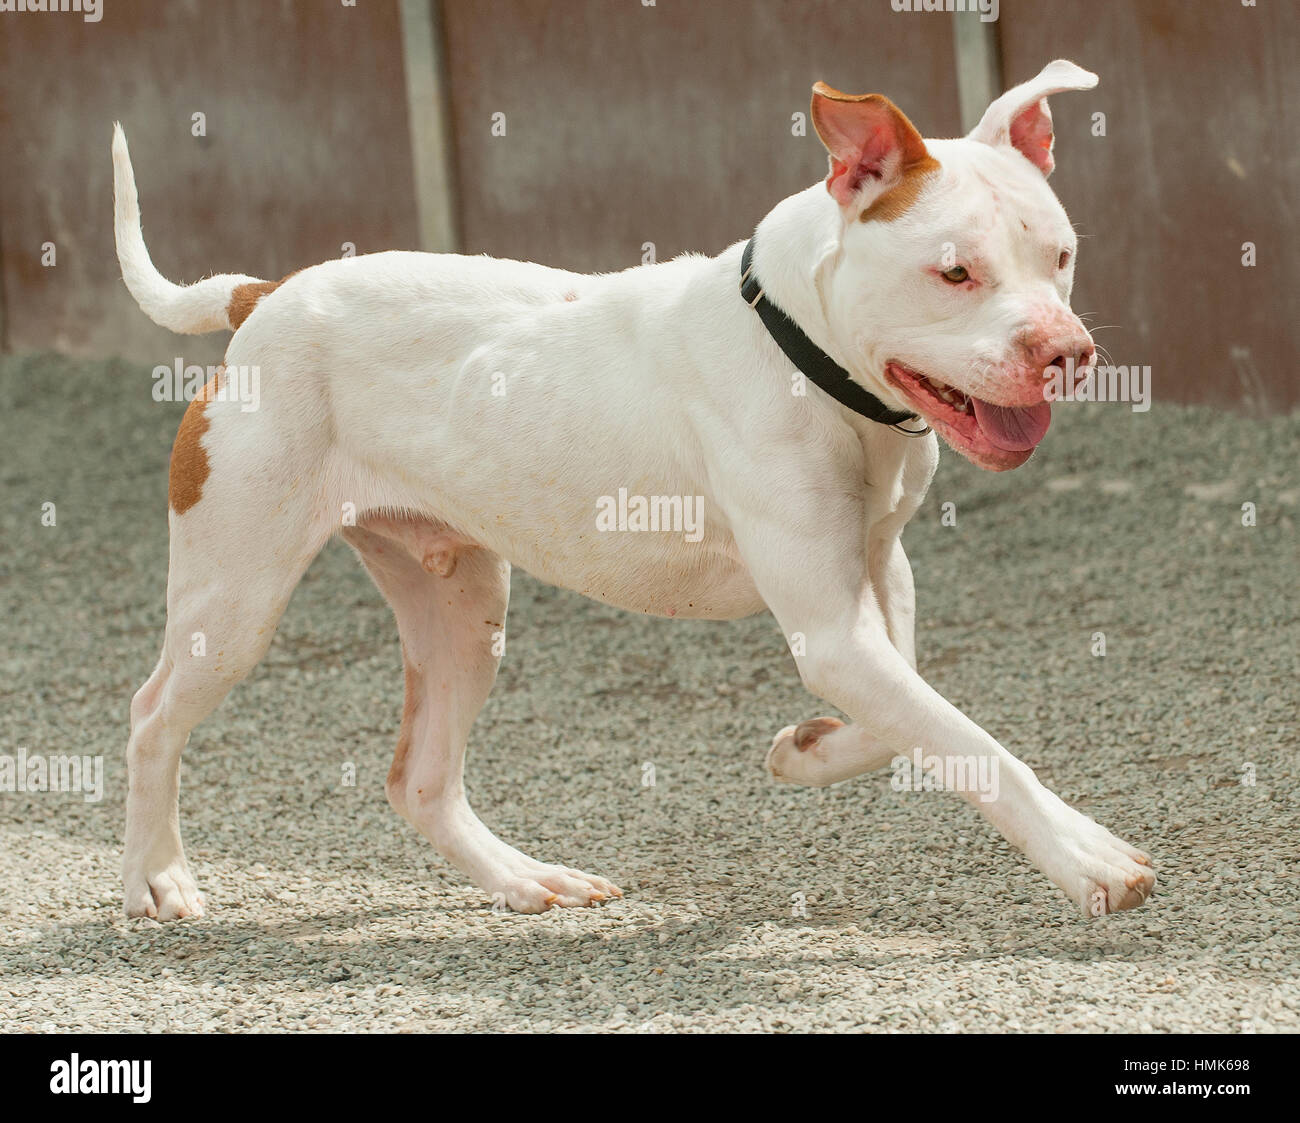 Playful, happy white pitbull rescue dog running and playing Stock Photo